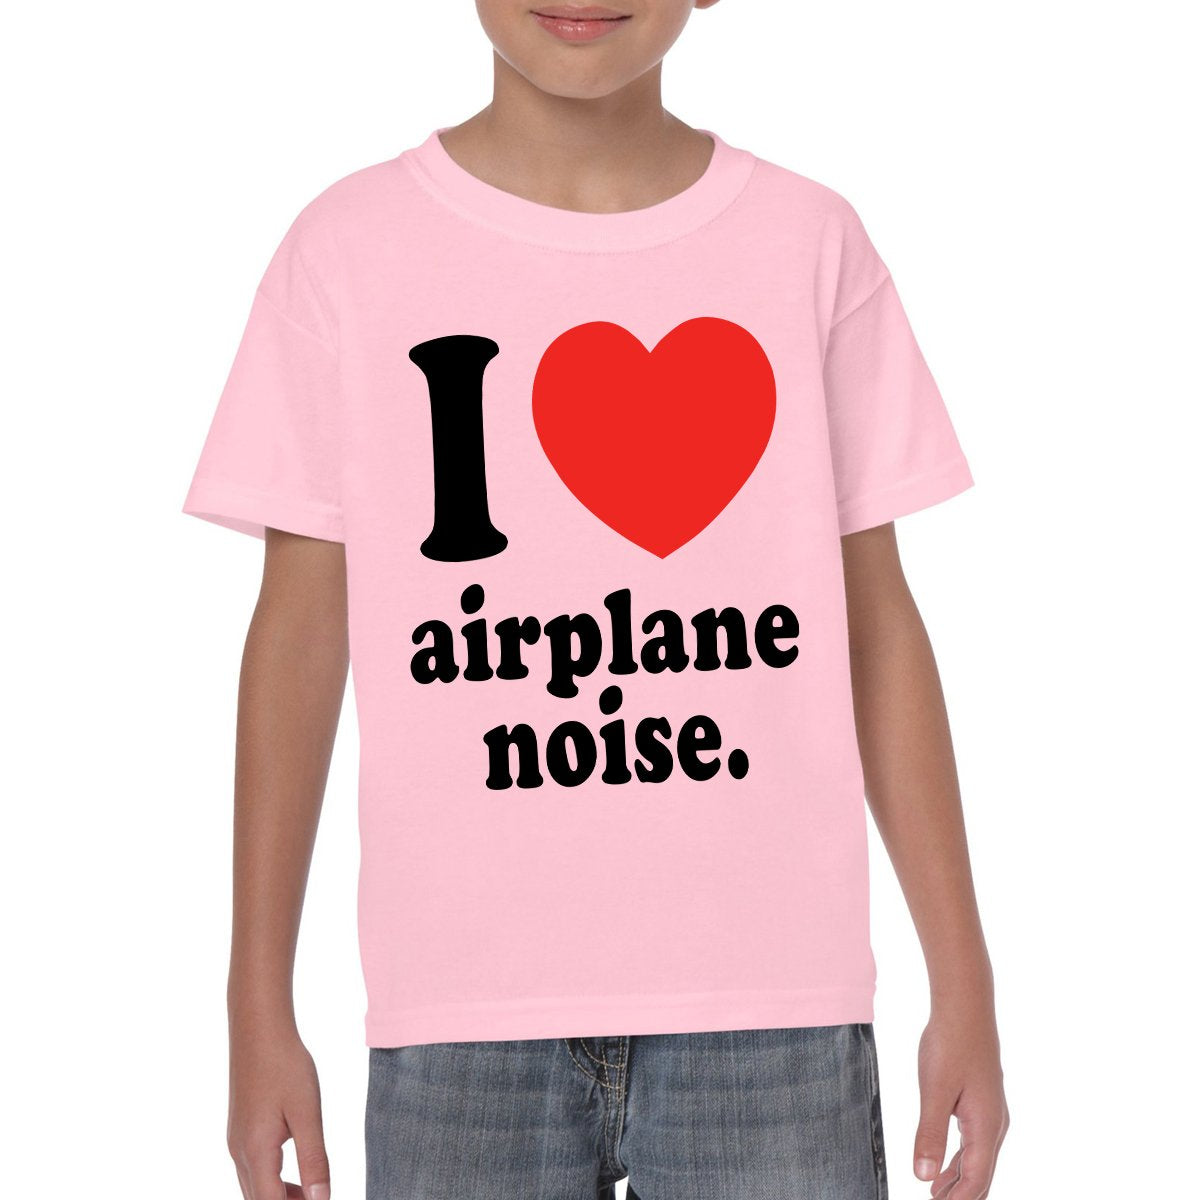 I LOVE AEROPLANE NOISE Youth Semi-Fitted T-Shirt